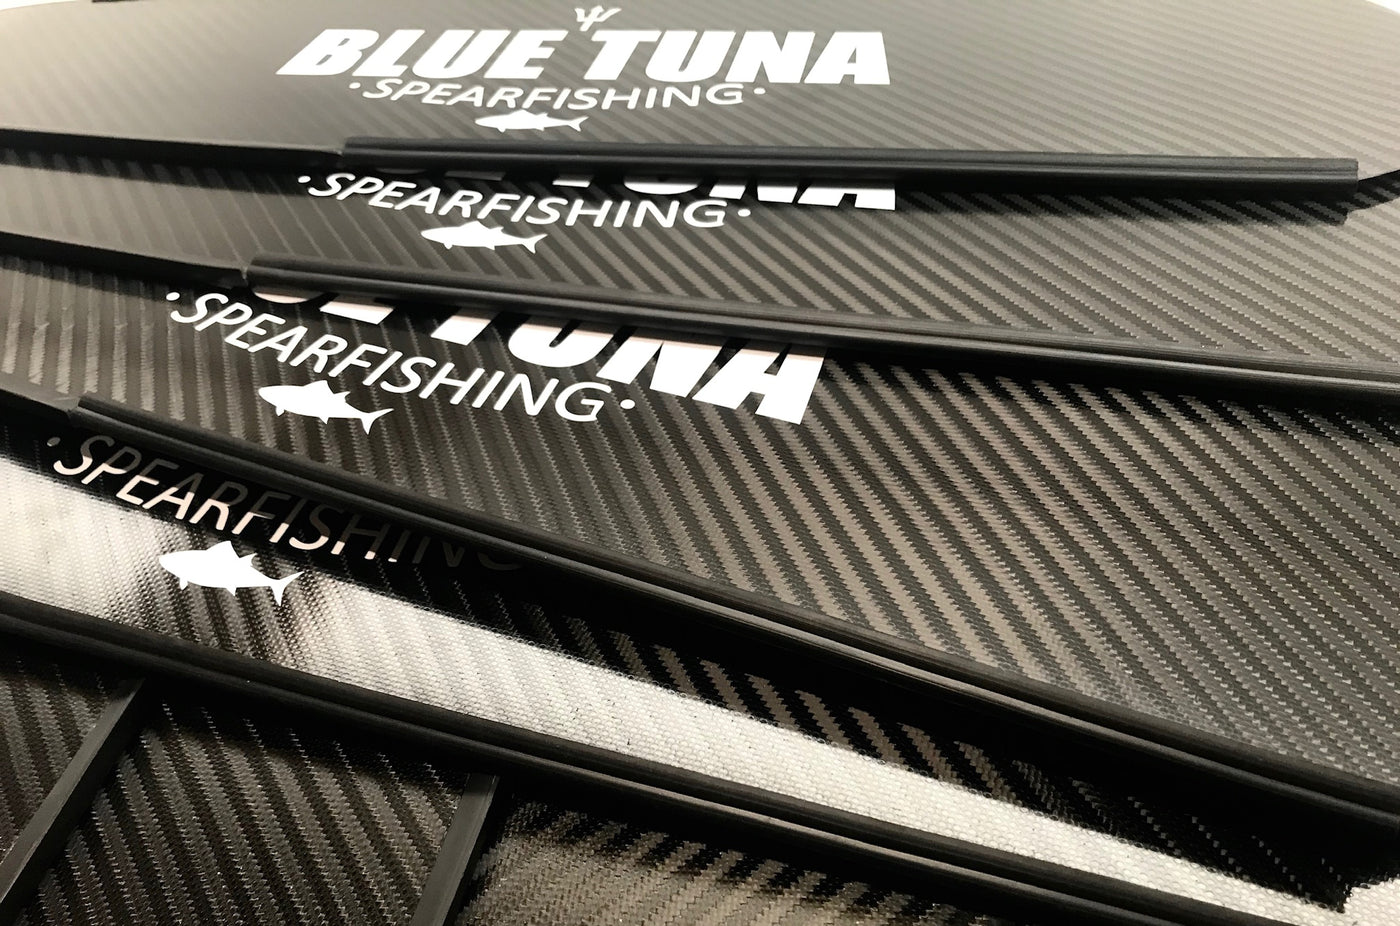 BTS Hydro 4x Carbon Blades -Carbon weave-  Blue Tuna Spearfishing Co